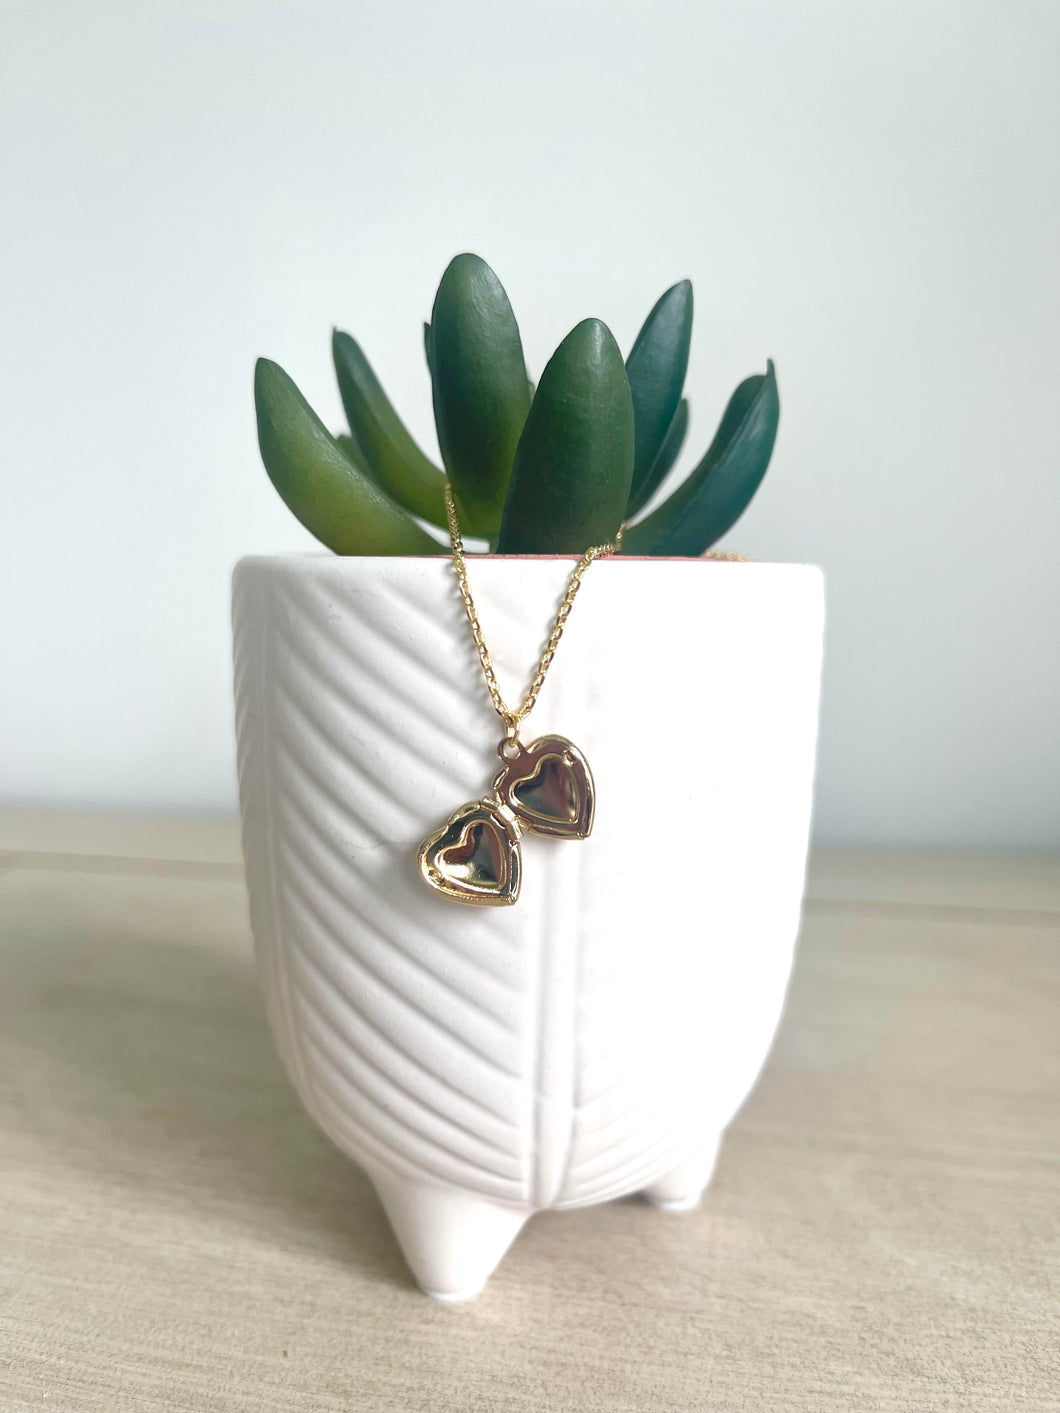 Petit etched heart locket pendant necklace in gold